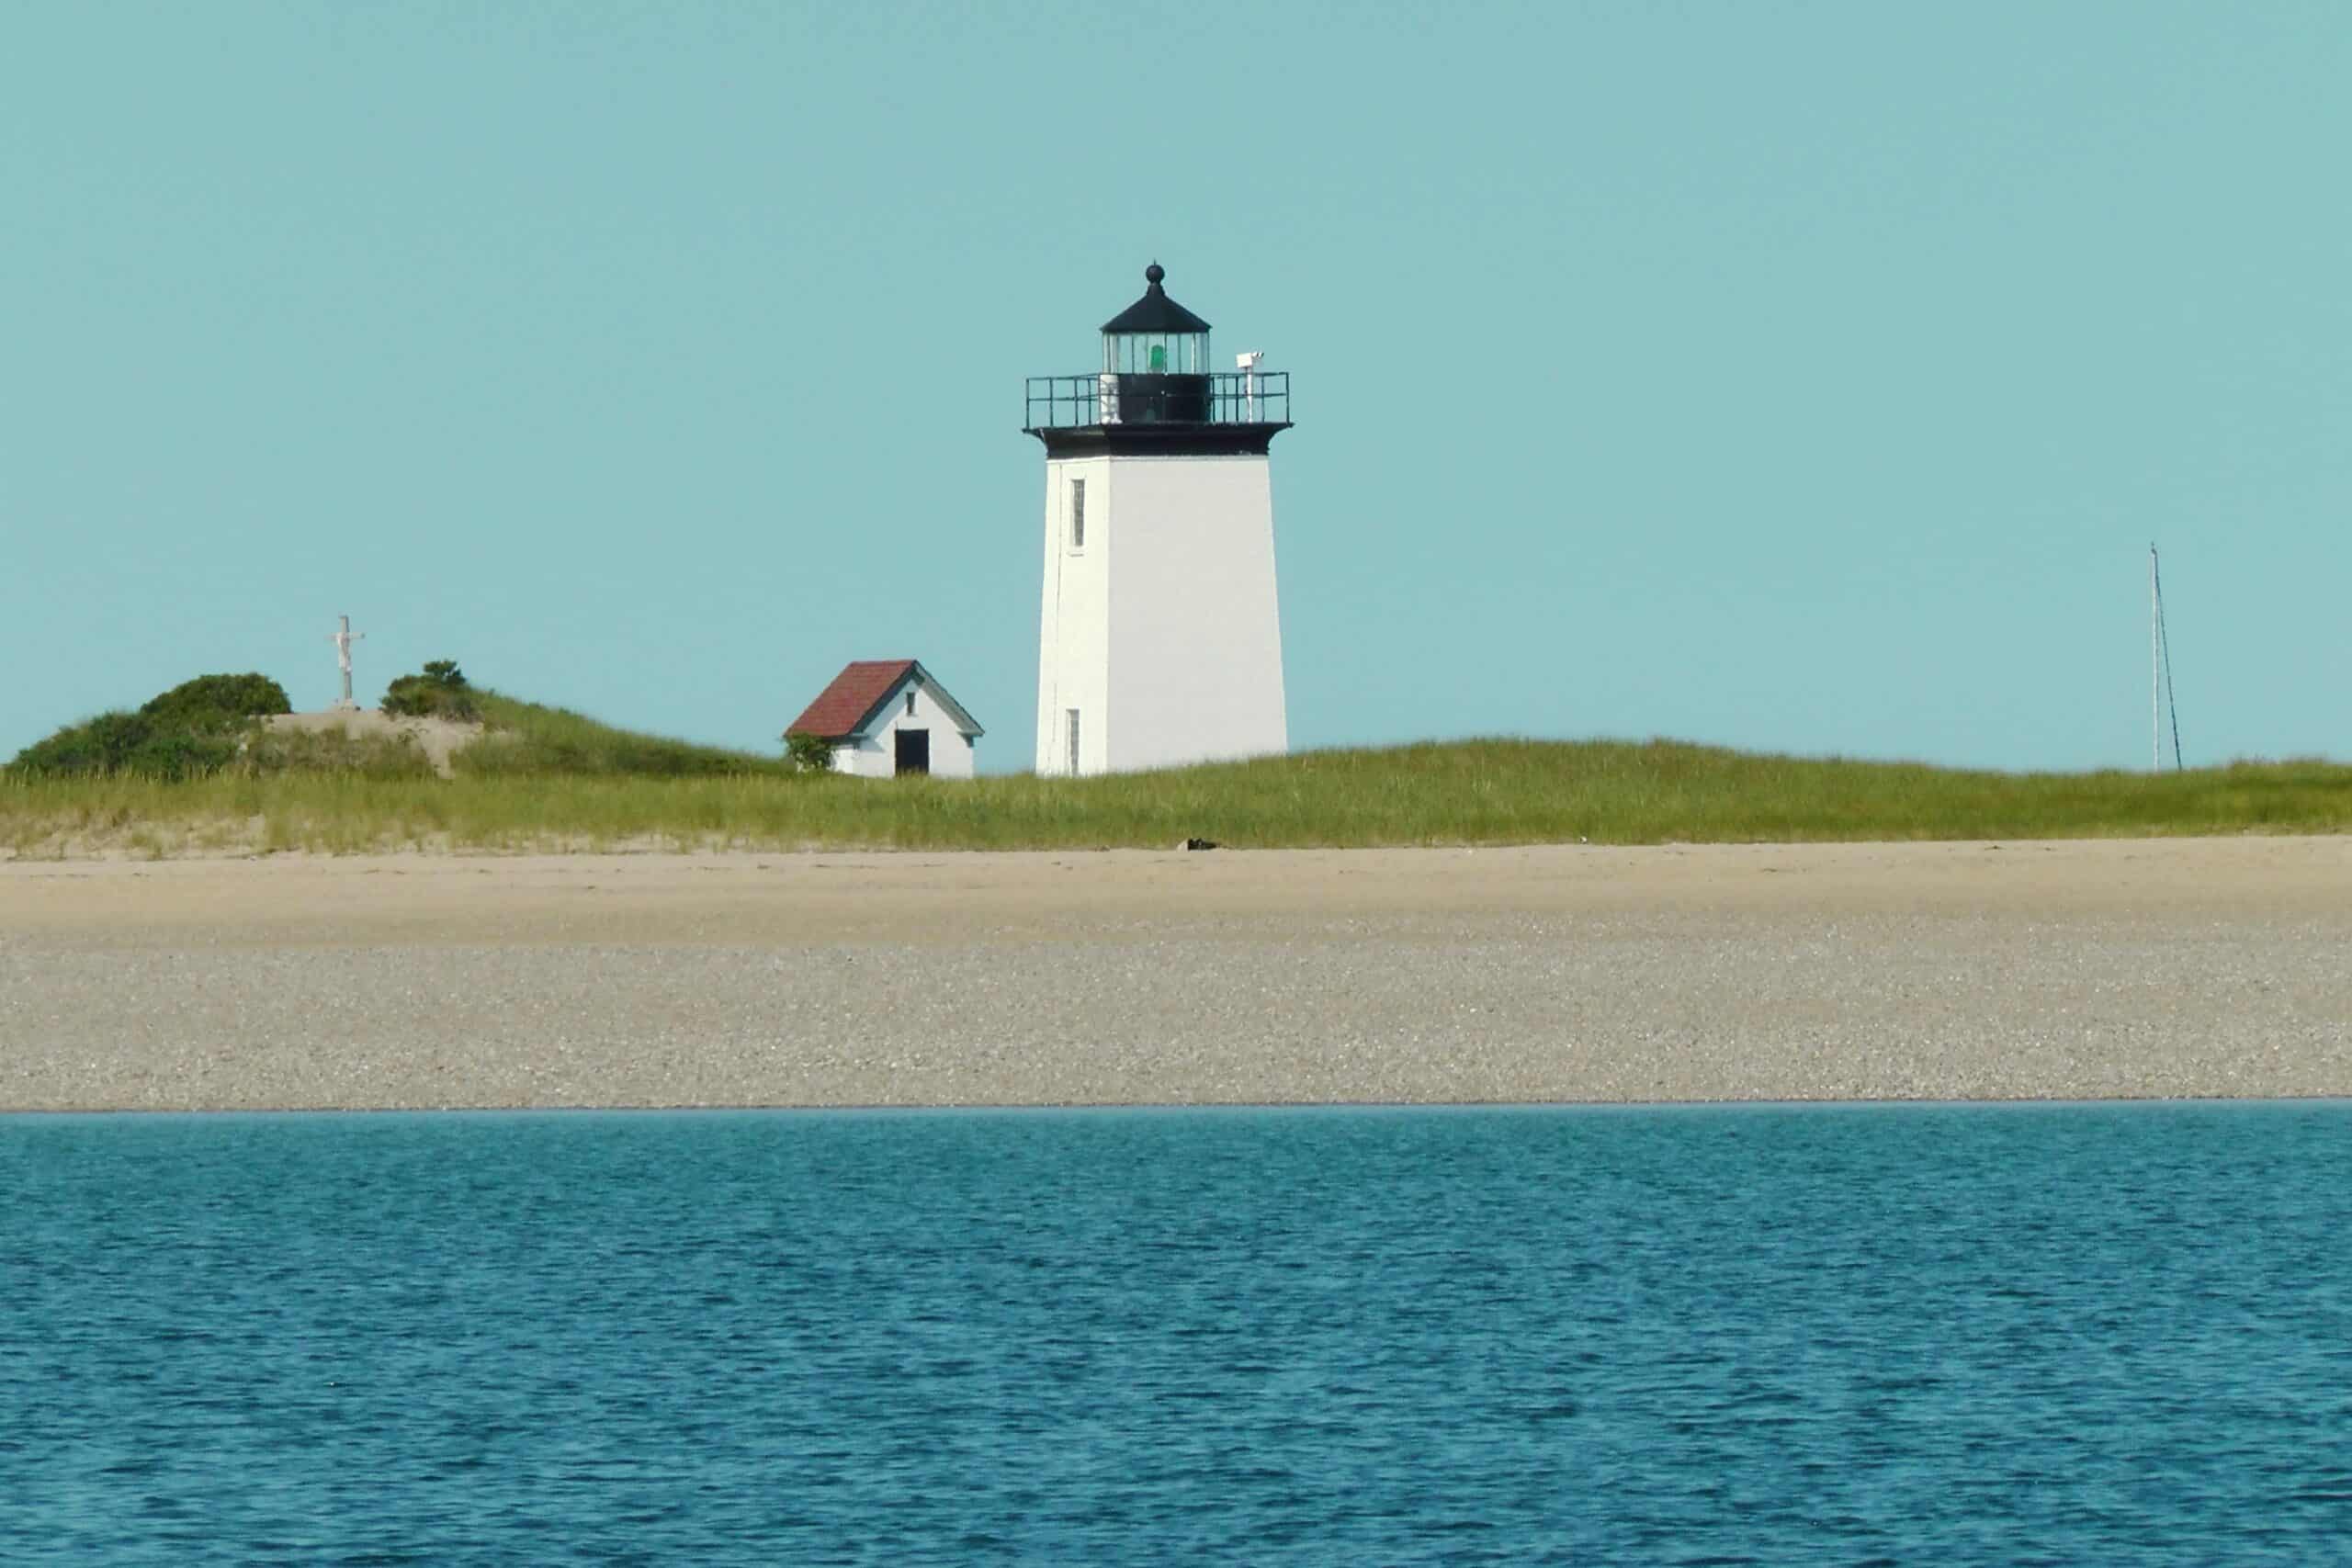 A lighthouse sits on the shore of a body of water.